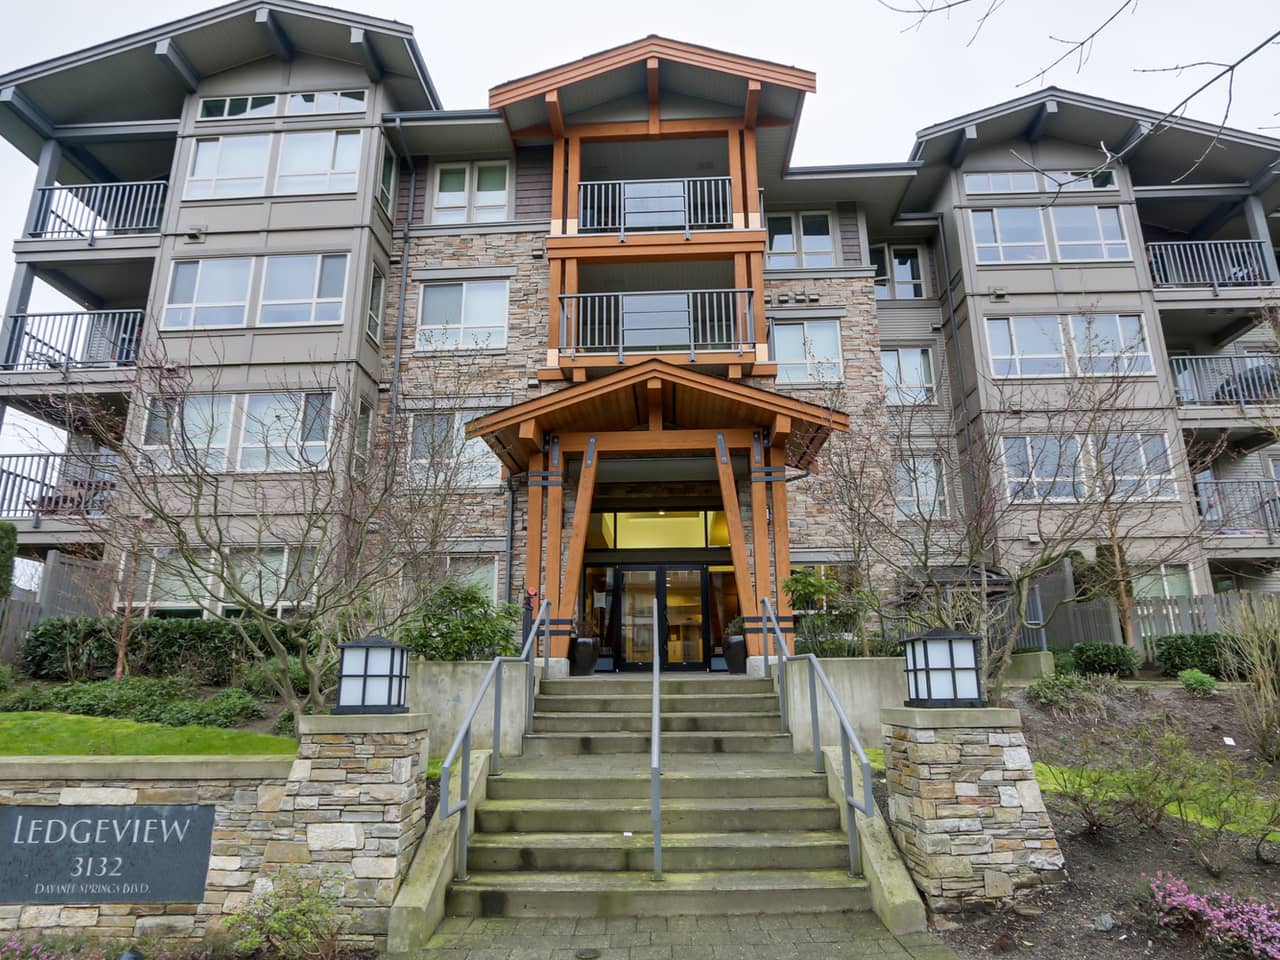 2 Bed at Ledgeview in Coquitlam